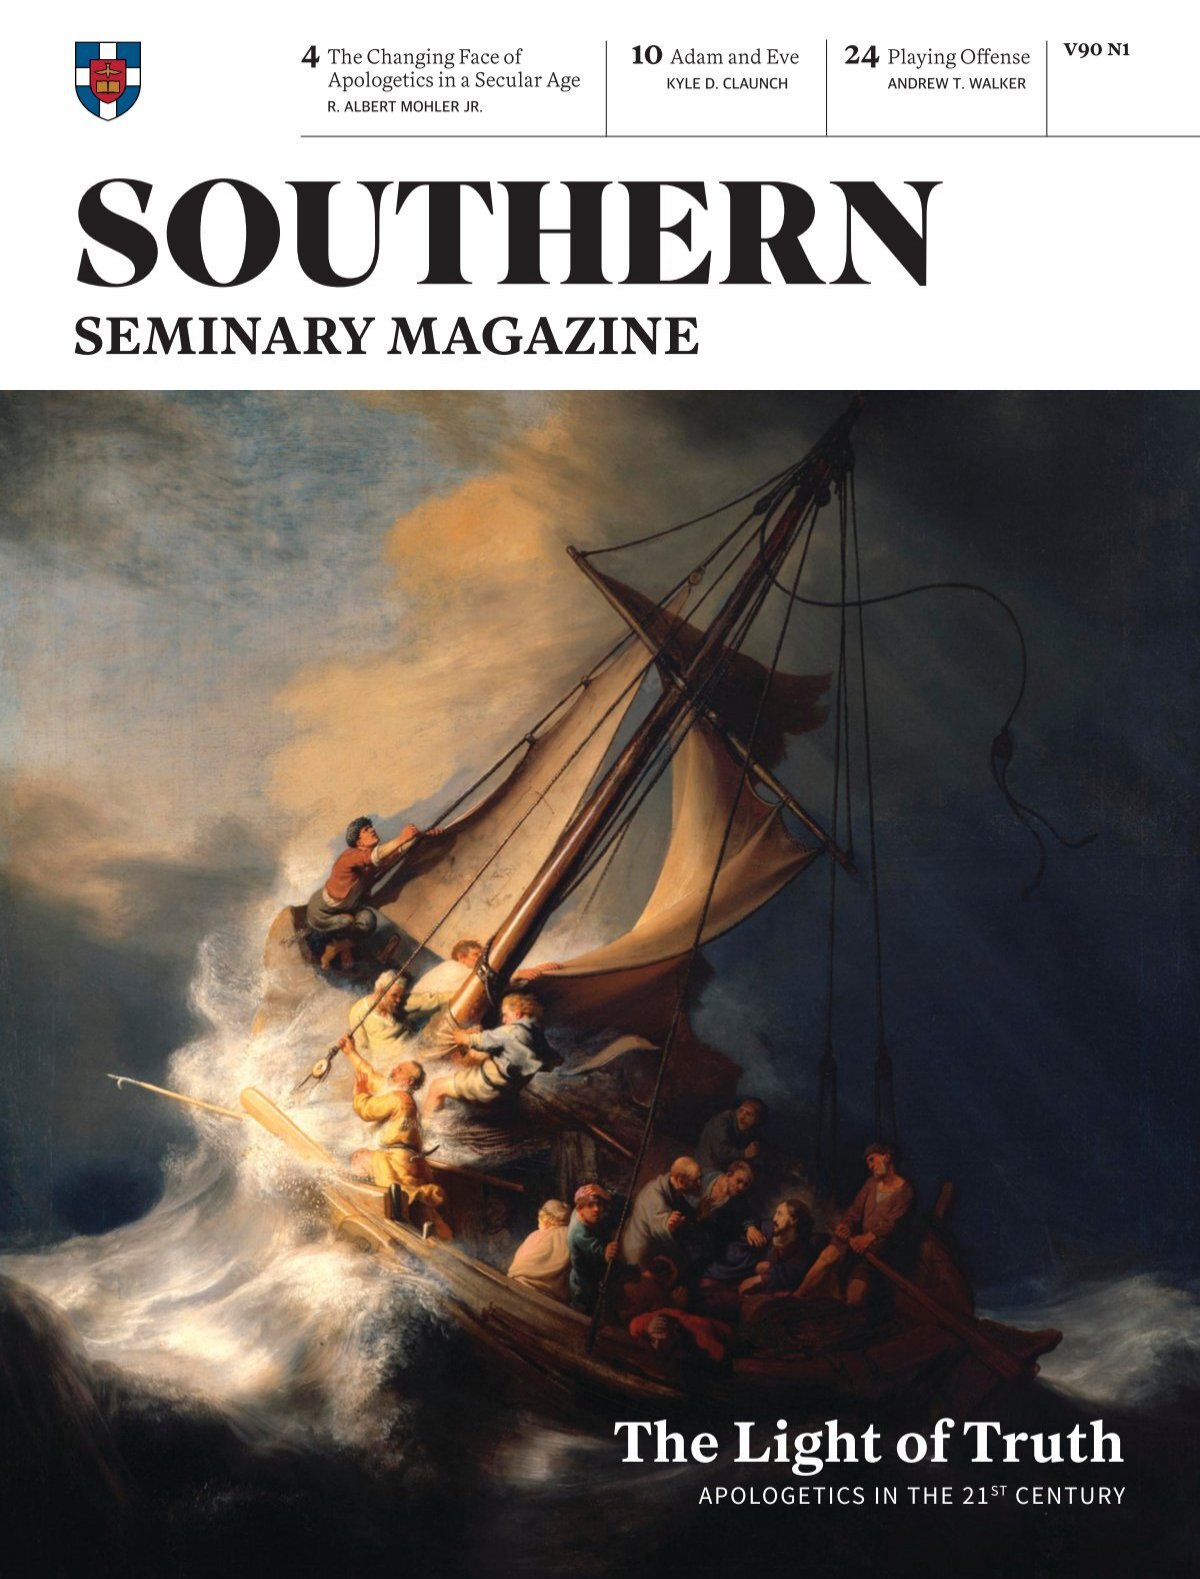 Southern Seminary Magazine (Vol 90.1) The Light of Truth